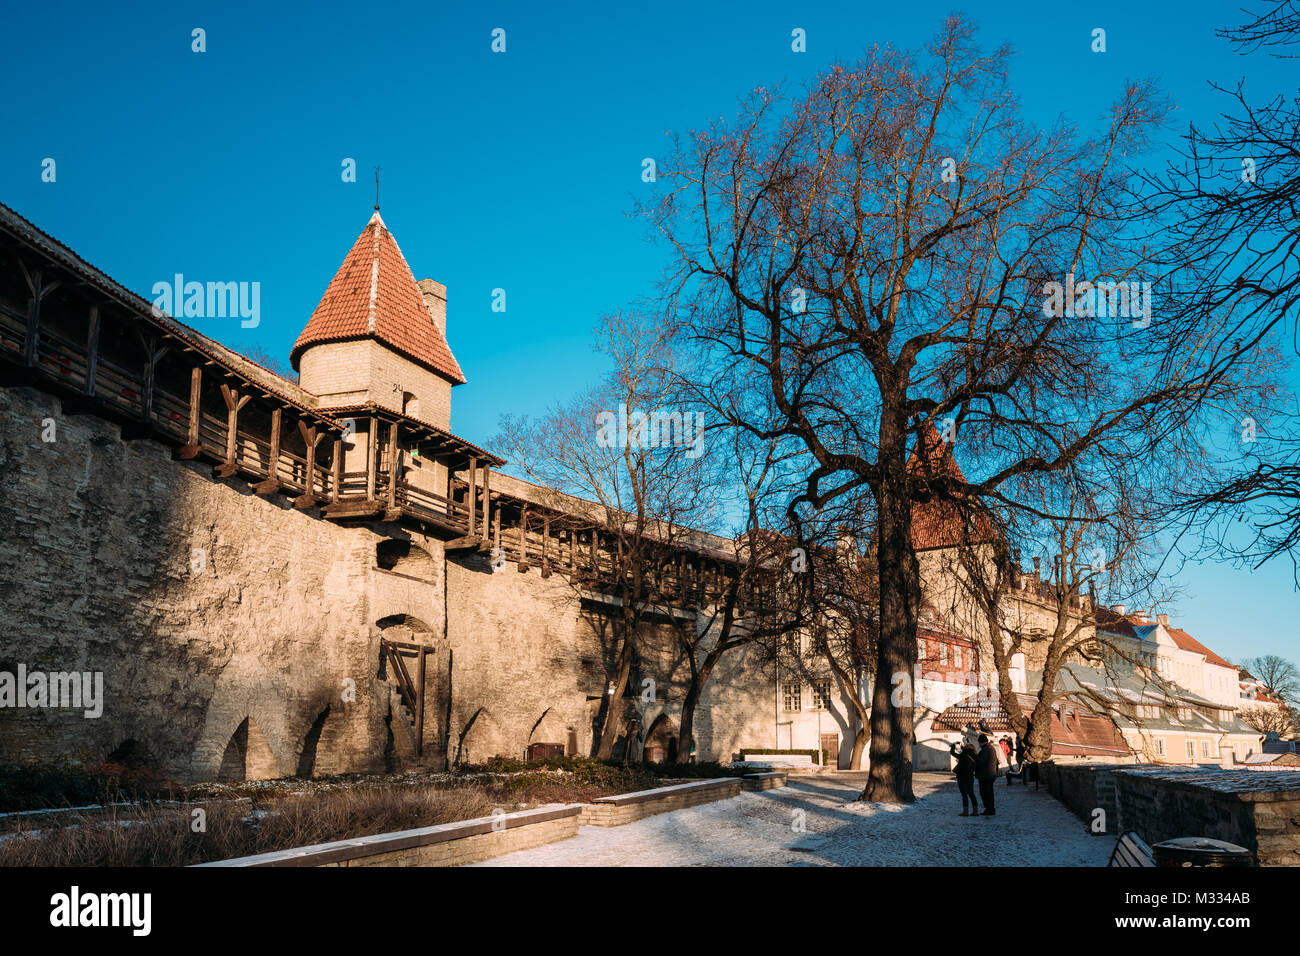 Tallinn, Estonia. View Of Danish King Garden And Stable Tower In Sunny Winter Day. It Is Green Area At Toompea In Tallinn Old Town. Stock Photo